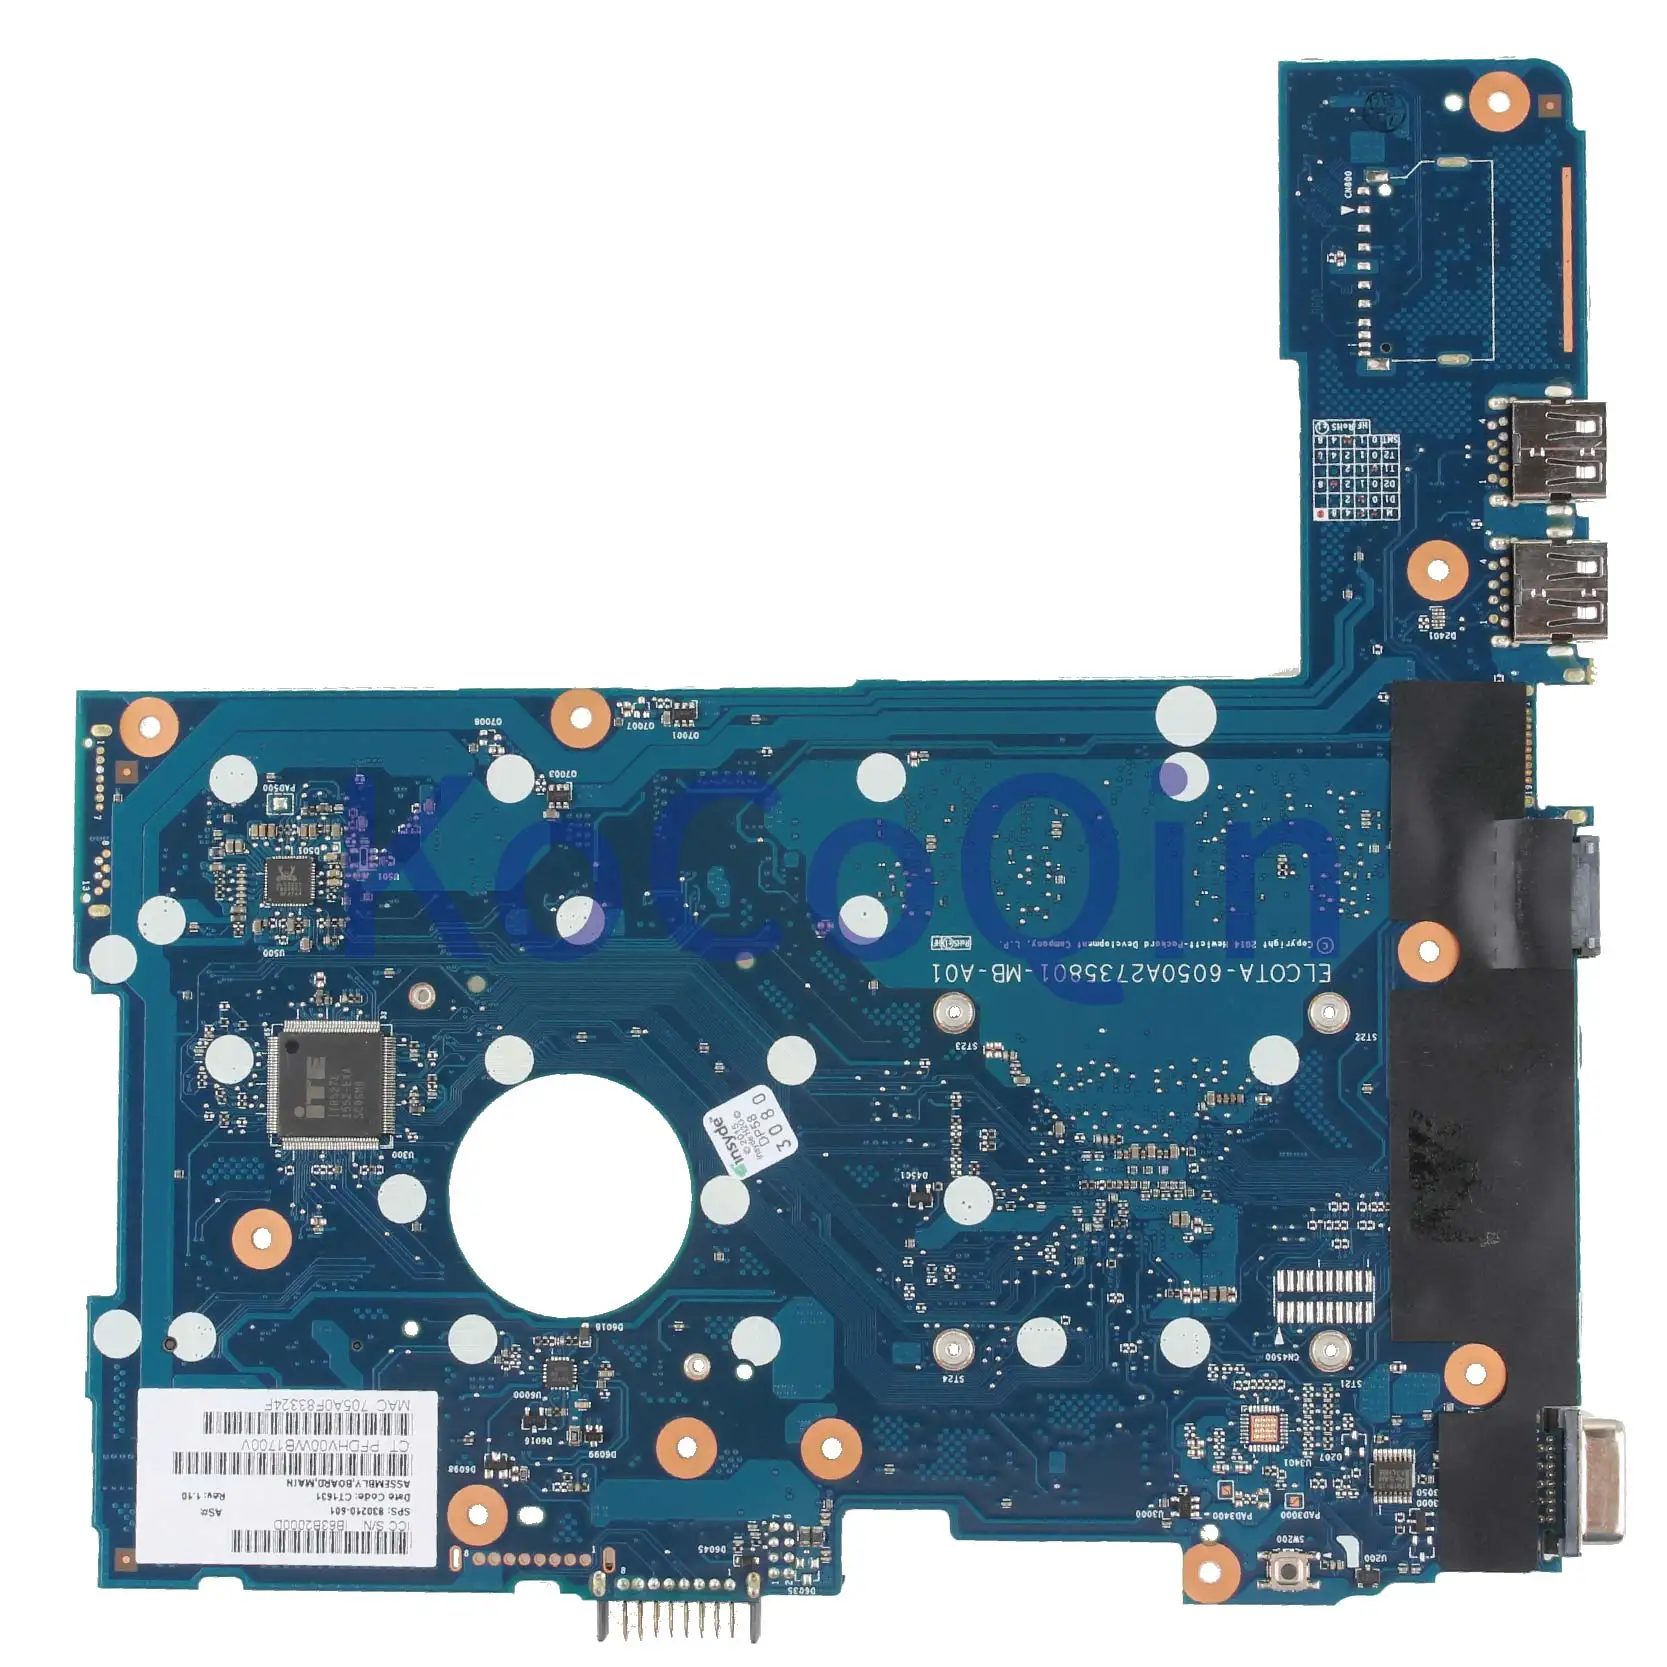 Hot Product  KoCoQin Laptop motherboard For HP Probook 241 G1 AM334 2G RAM Mainboard 830210-001 830210-501 6050A